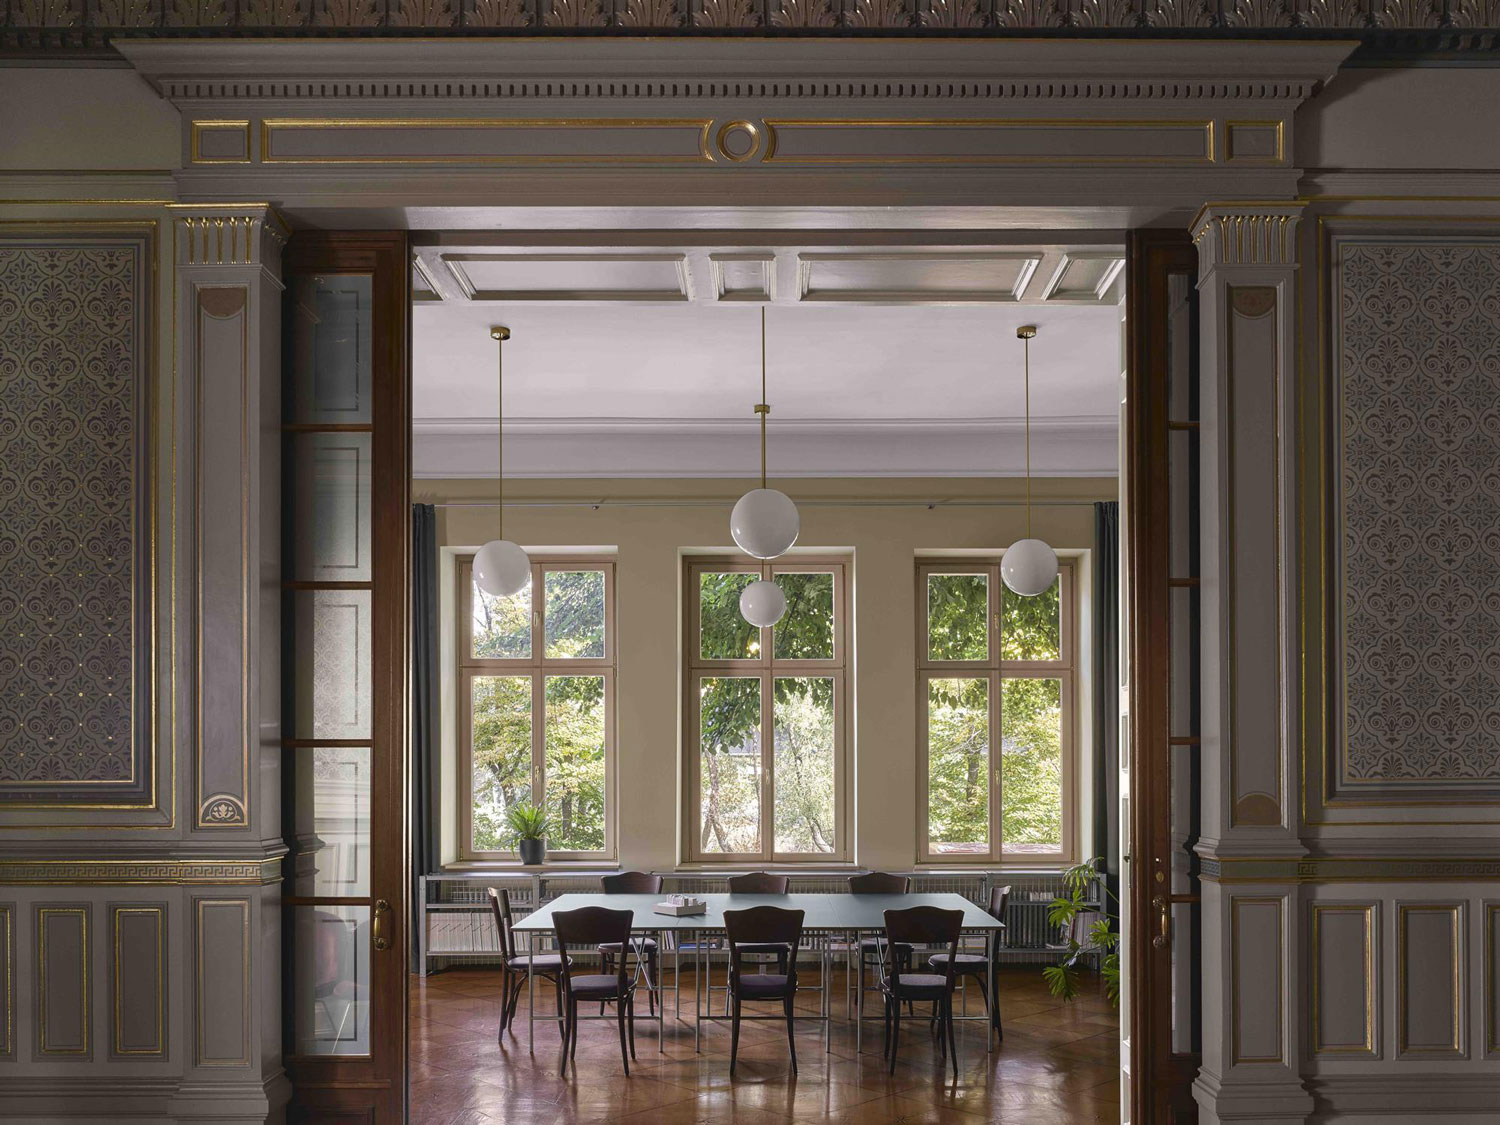 Grand C19th Palais in Berlin Reimagined as an Office by David Kohn Architects.-8